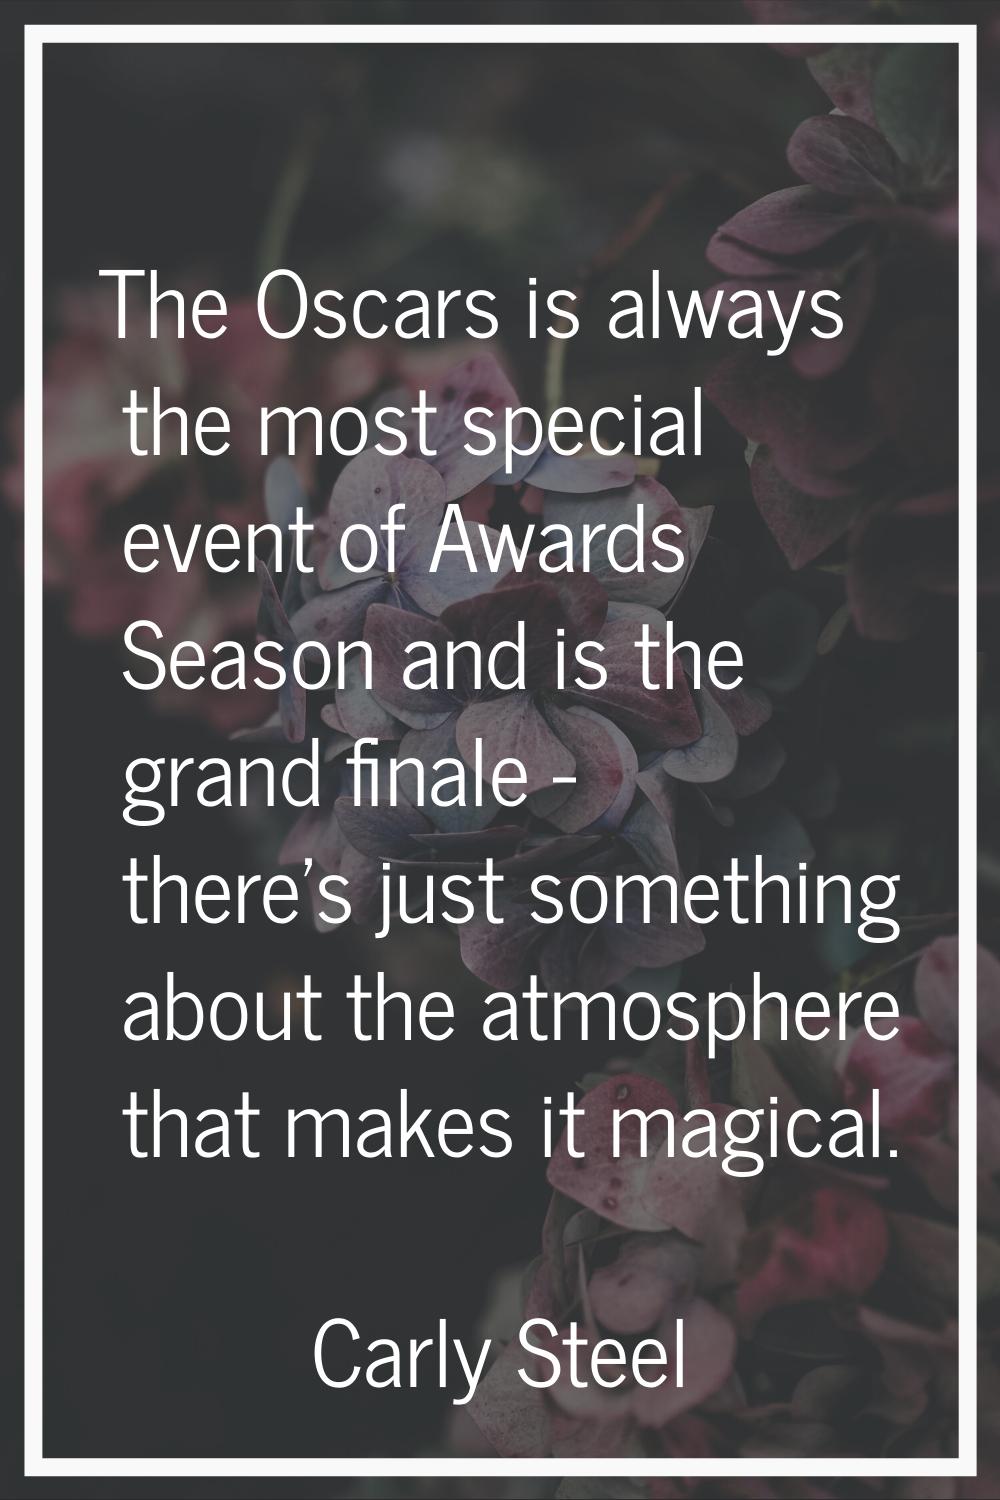 The Oscars is always the most special event of Awards Season and is the grand finale - there's just